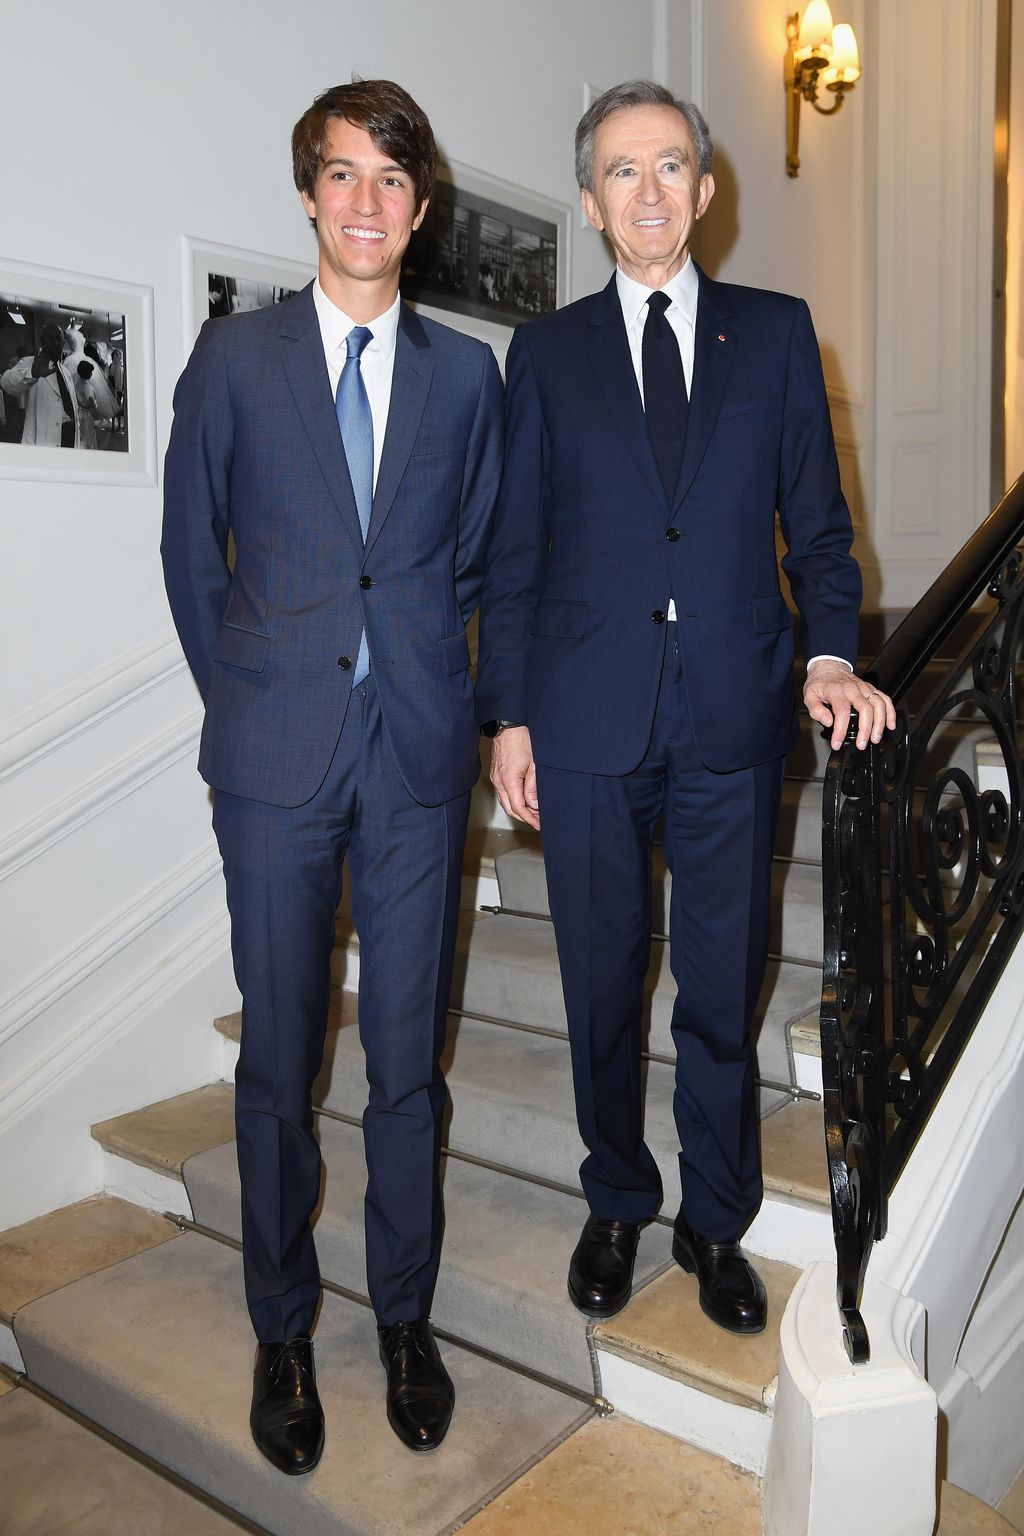 PARIS, FRANCE - JULY 04: Bernard Arnault and Alexandre Arnault attend the Christian Dior Haute Couture Fall/Winter 2016-2017 show as part of Paris Fashion Week at 30, Avenue Montaigne on July 4, 2016 in Paris, France.  (Photo by Pascal Le Segretain/Getty Images for Dior)